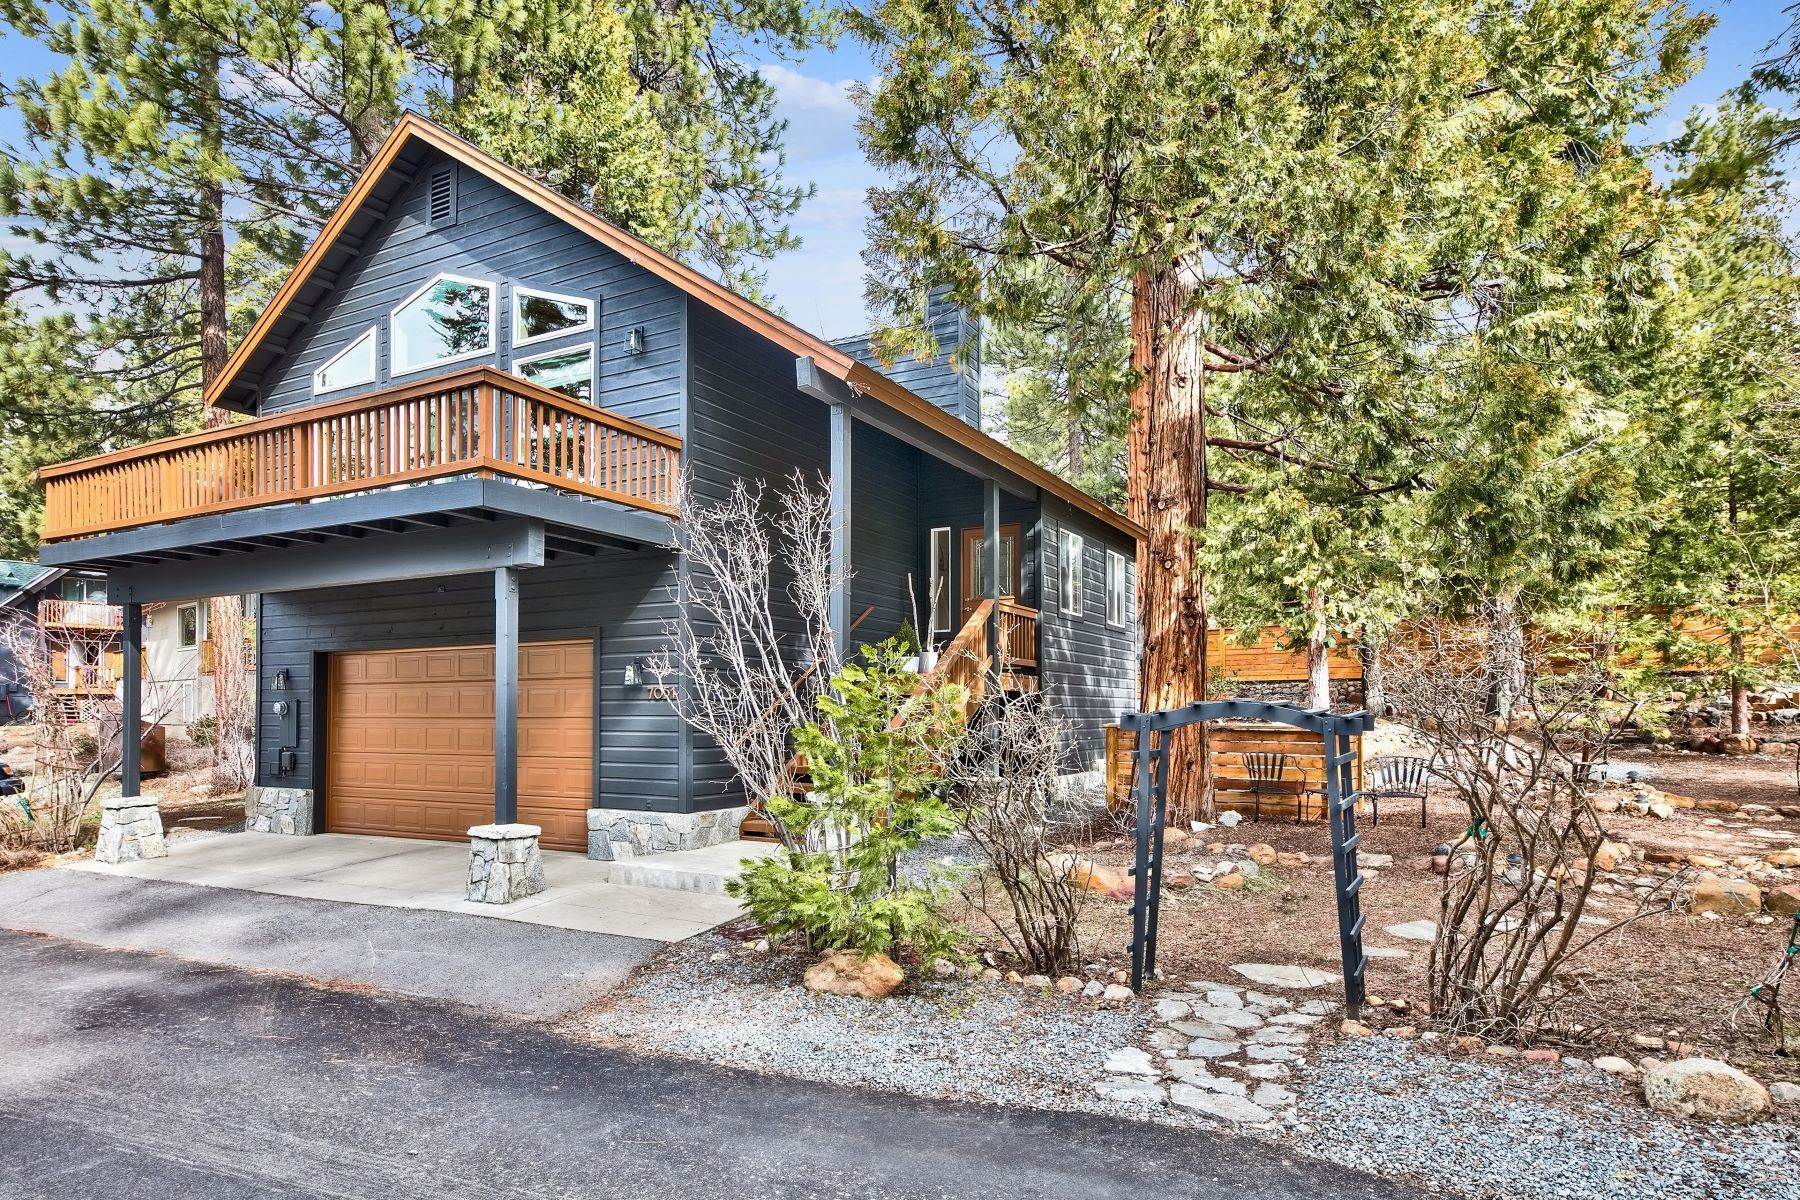 Single Family Homes for Active at Tahoe Vista Charmer 7051 Allenby Way Tahoe Vista, California 96148 United States